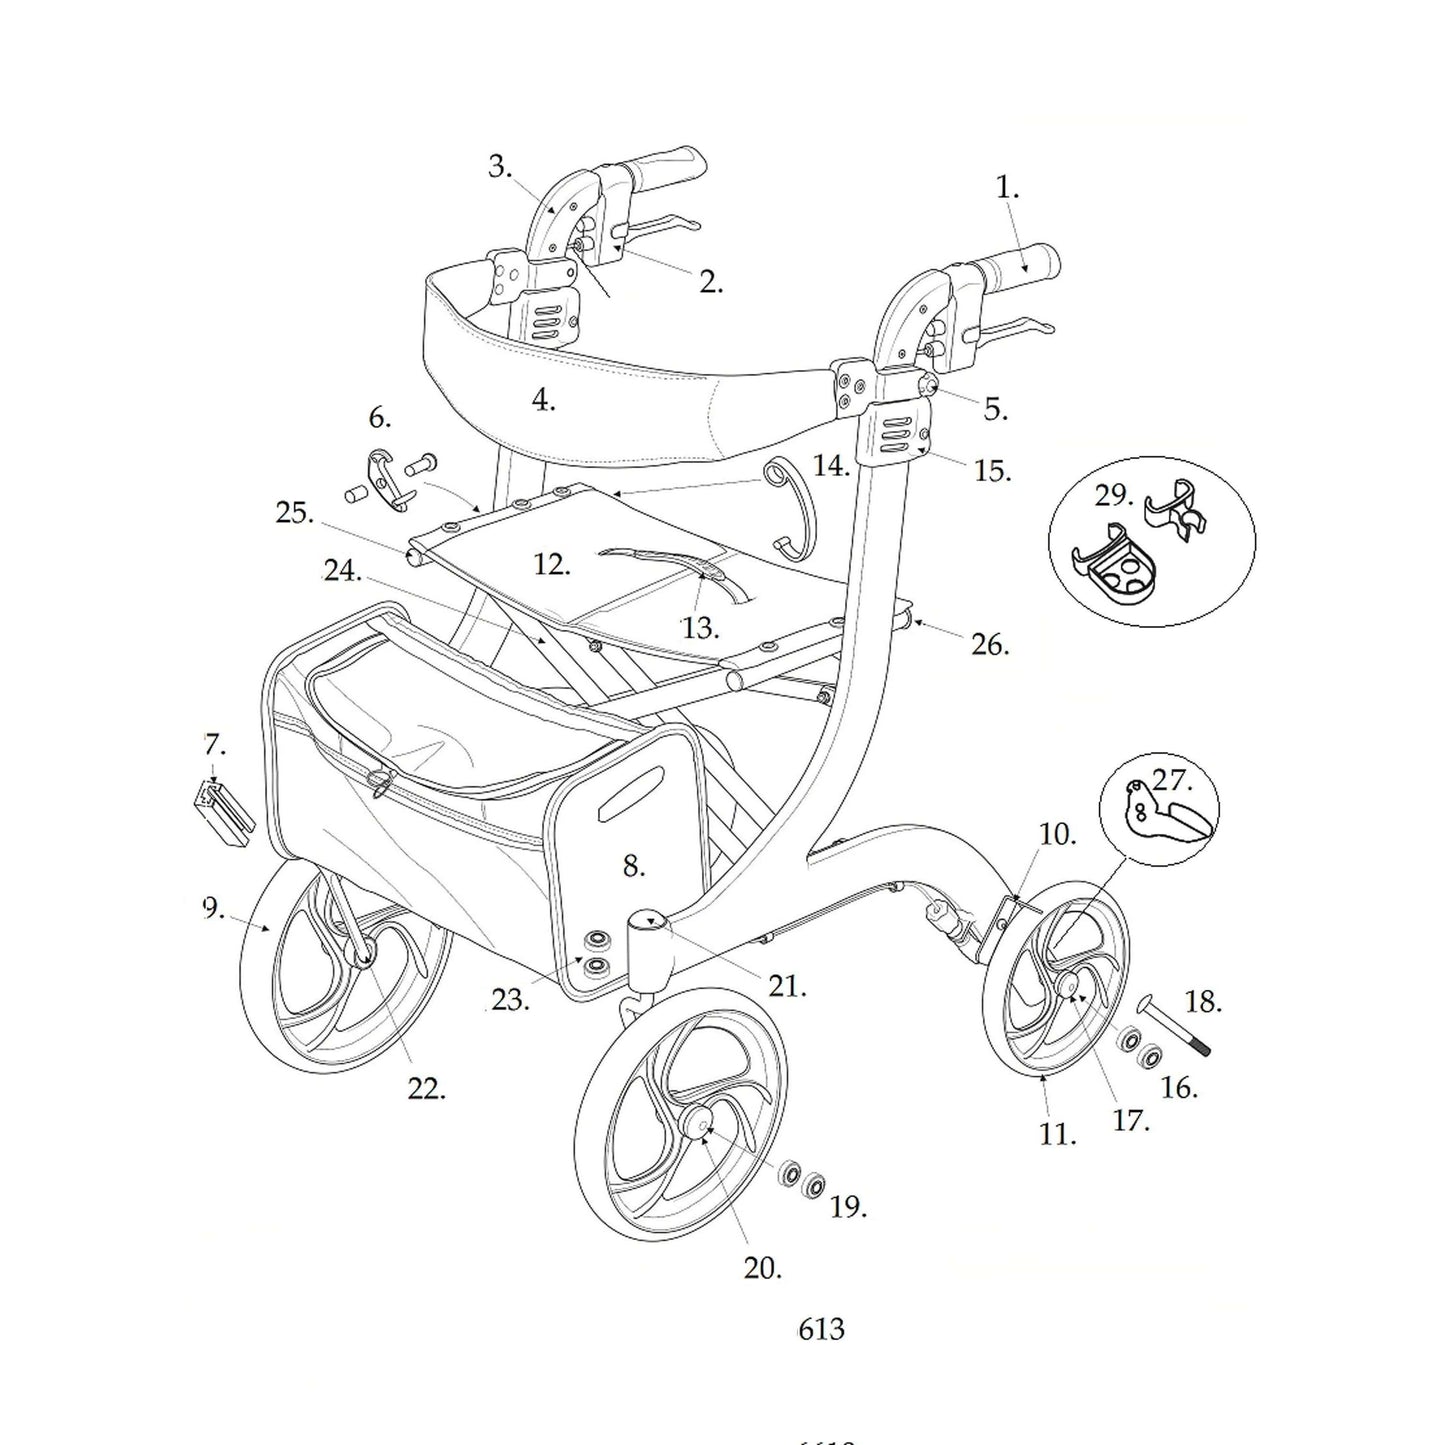 All Replacement parts for Drive Nitro 10266 rollator